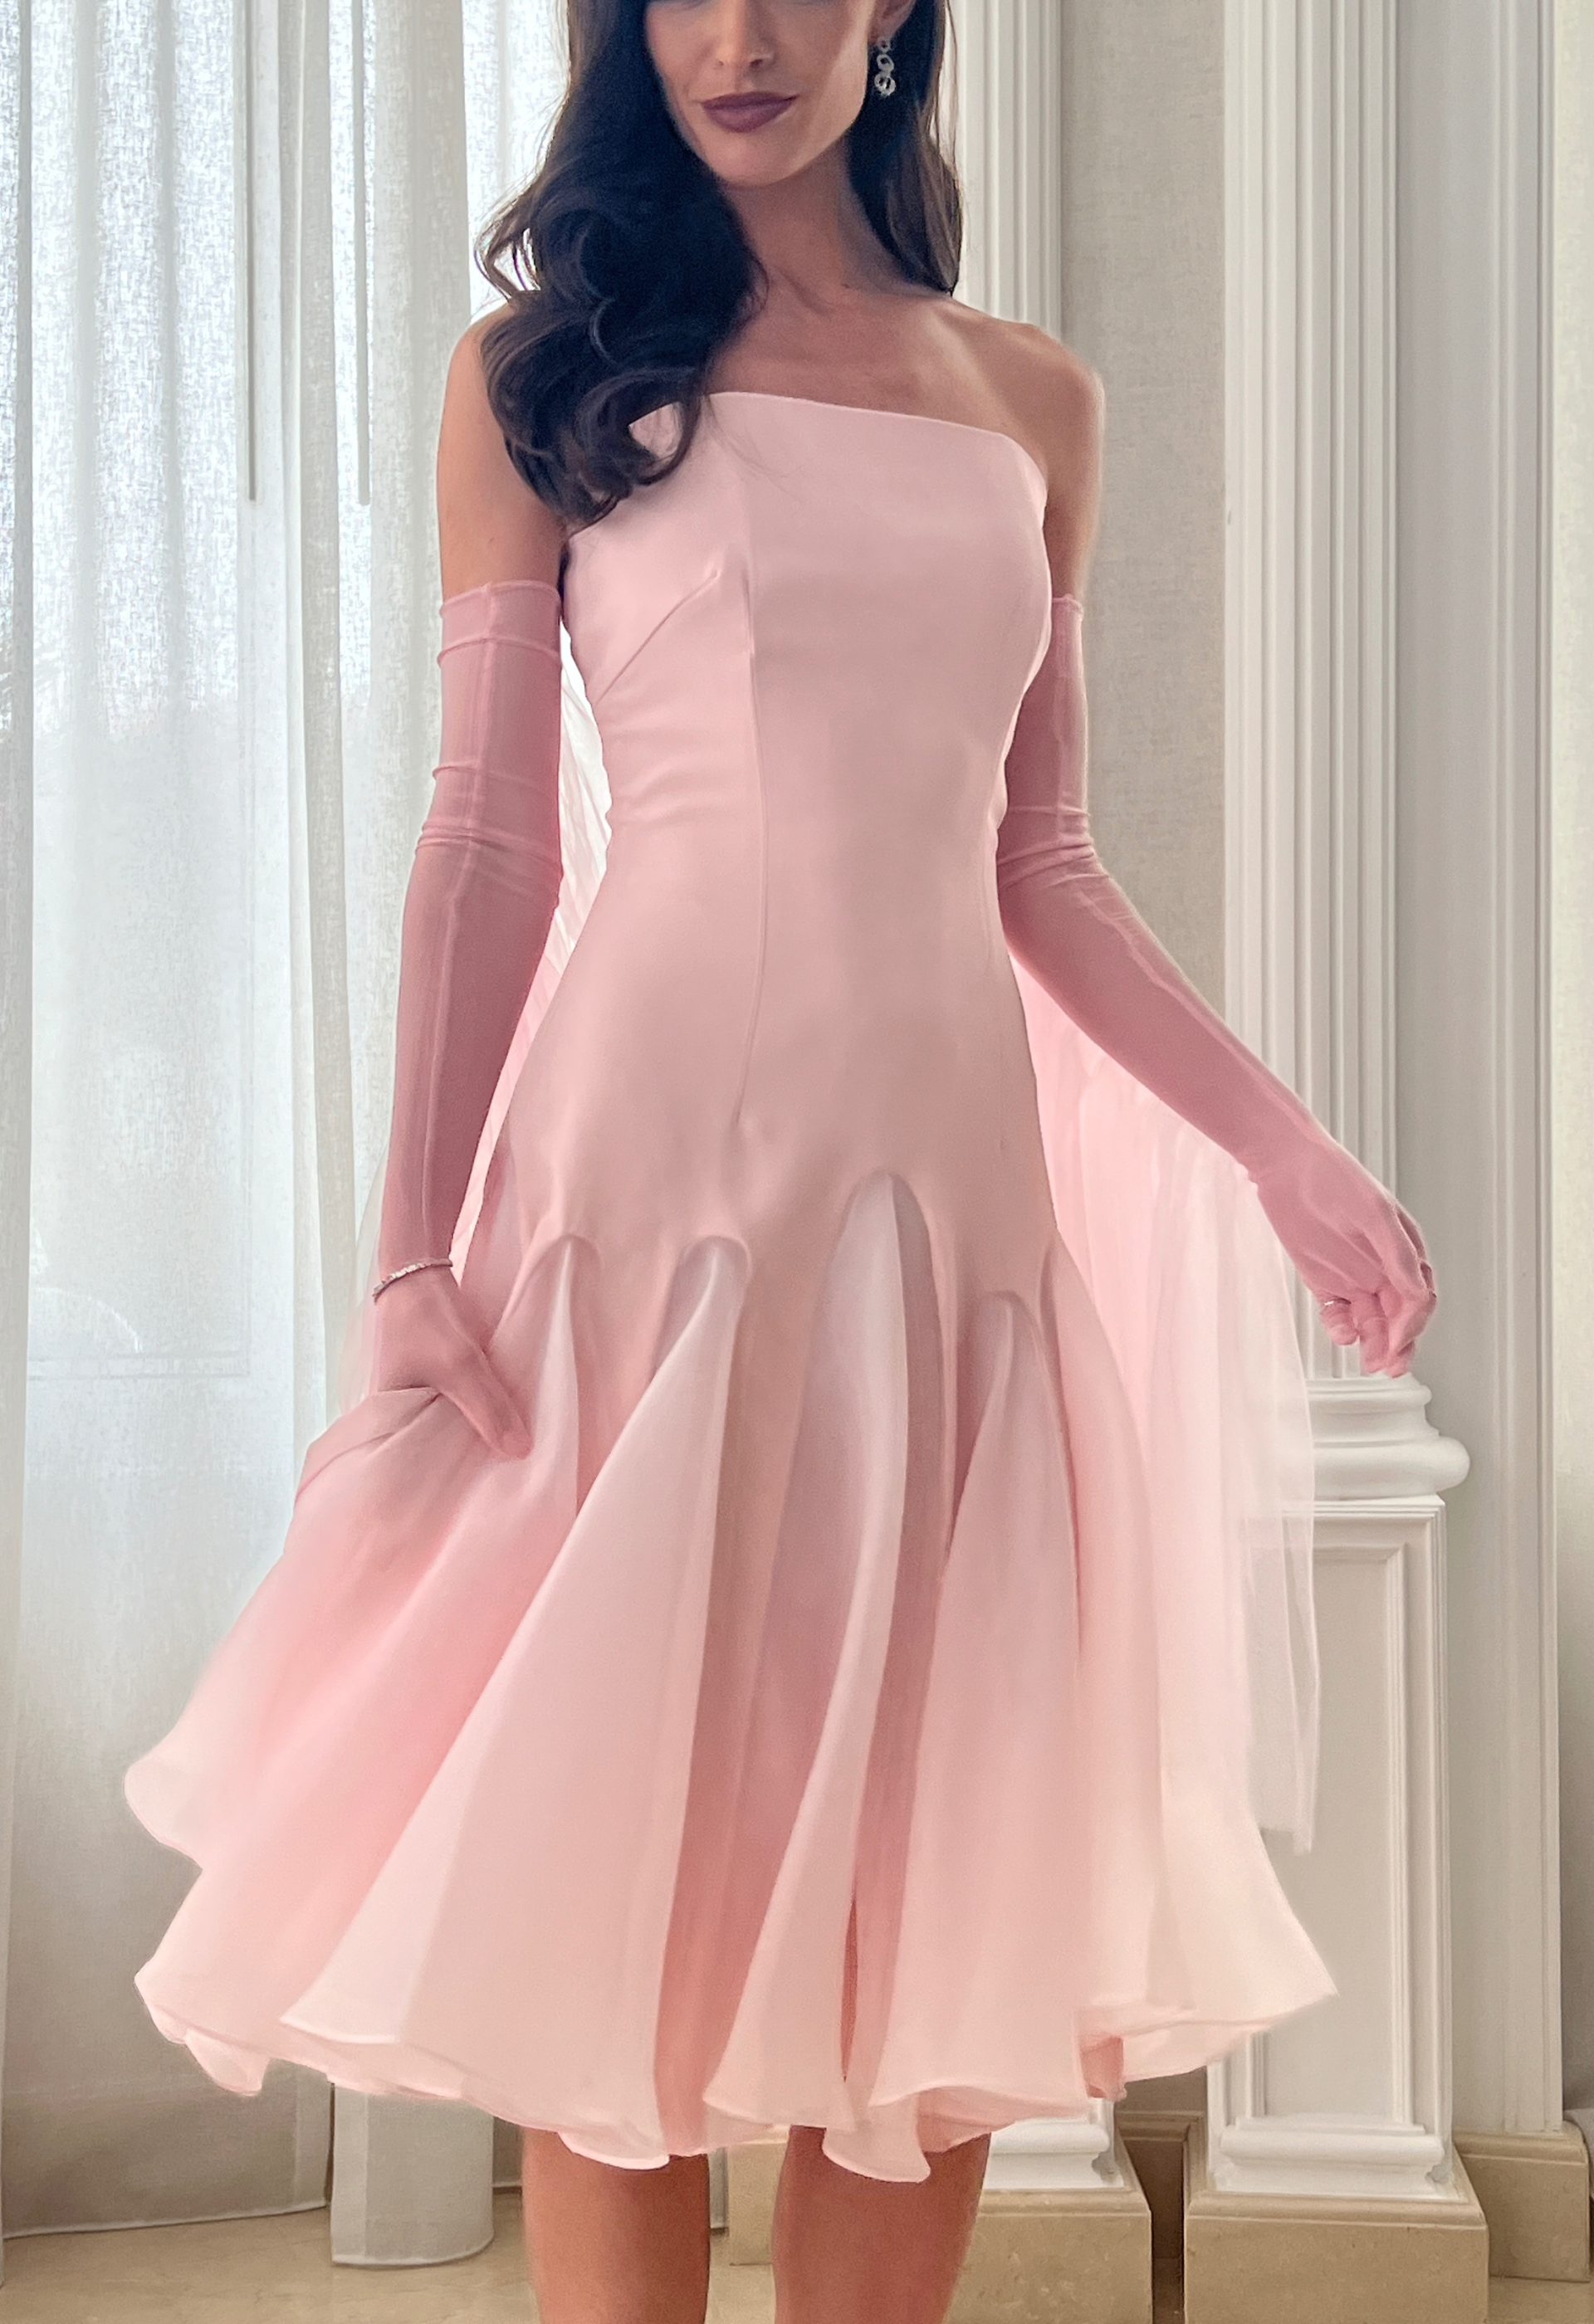 Strapless gown with tulle glove